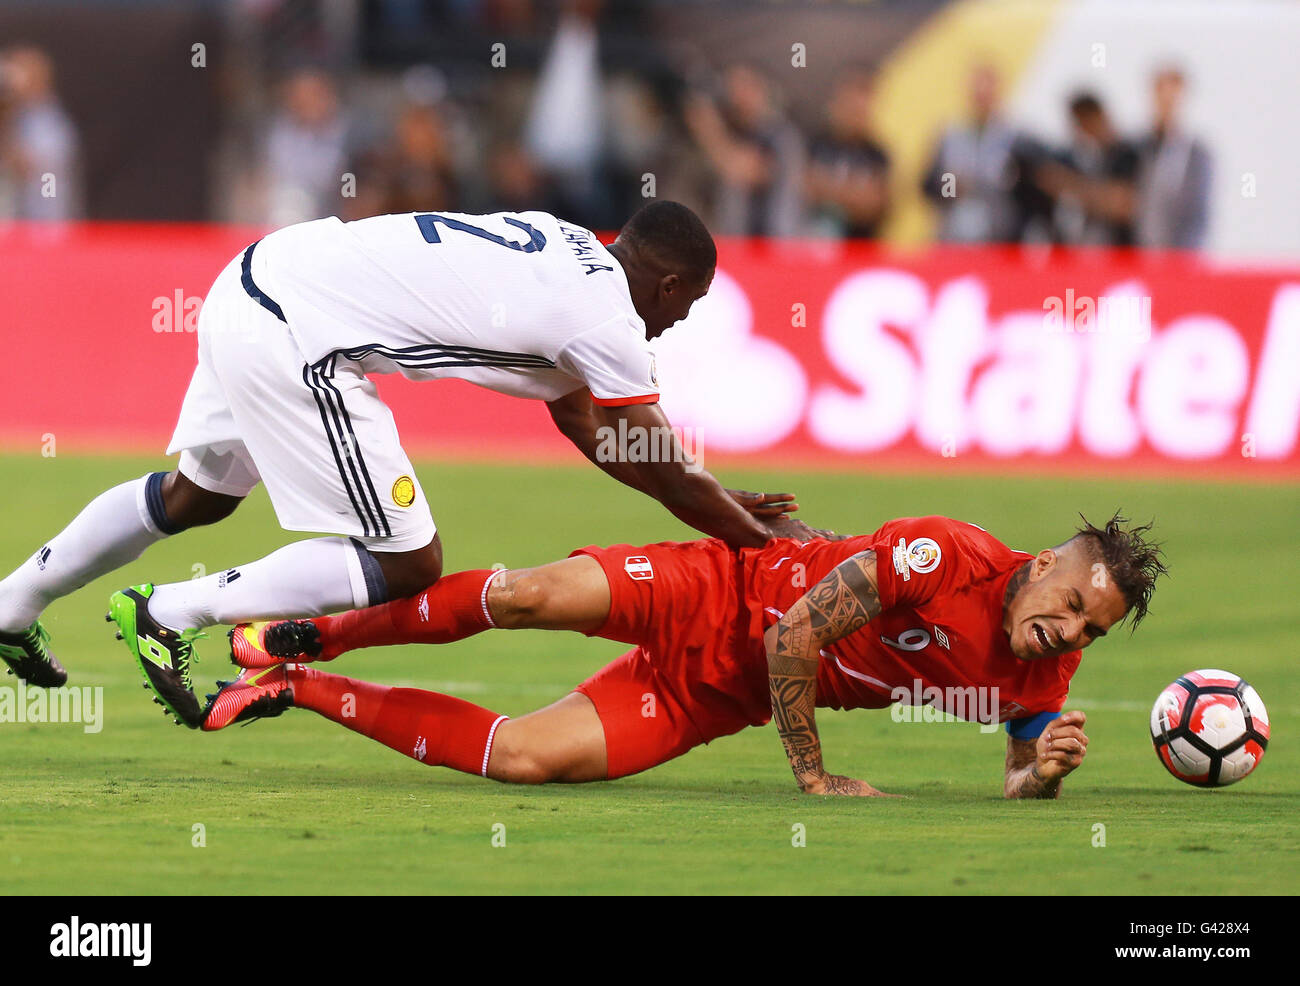 New Jersey, USA. 17th June, 2016. Cristian Zapata of Colombia vies with Jose Guerrero (R) of Peru during their quarterfinal match of 2016 Copa America soccer tournament at the Metlife Stadium in New Jersey, the United States, June 17, 2016. Colombia won in a penalty shootout with 4-2. Credit:  Qin Lang/Xinhua/Alamy Live News Stock Photo